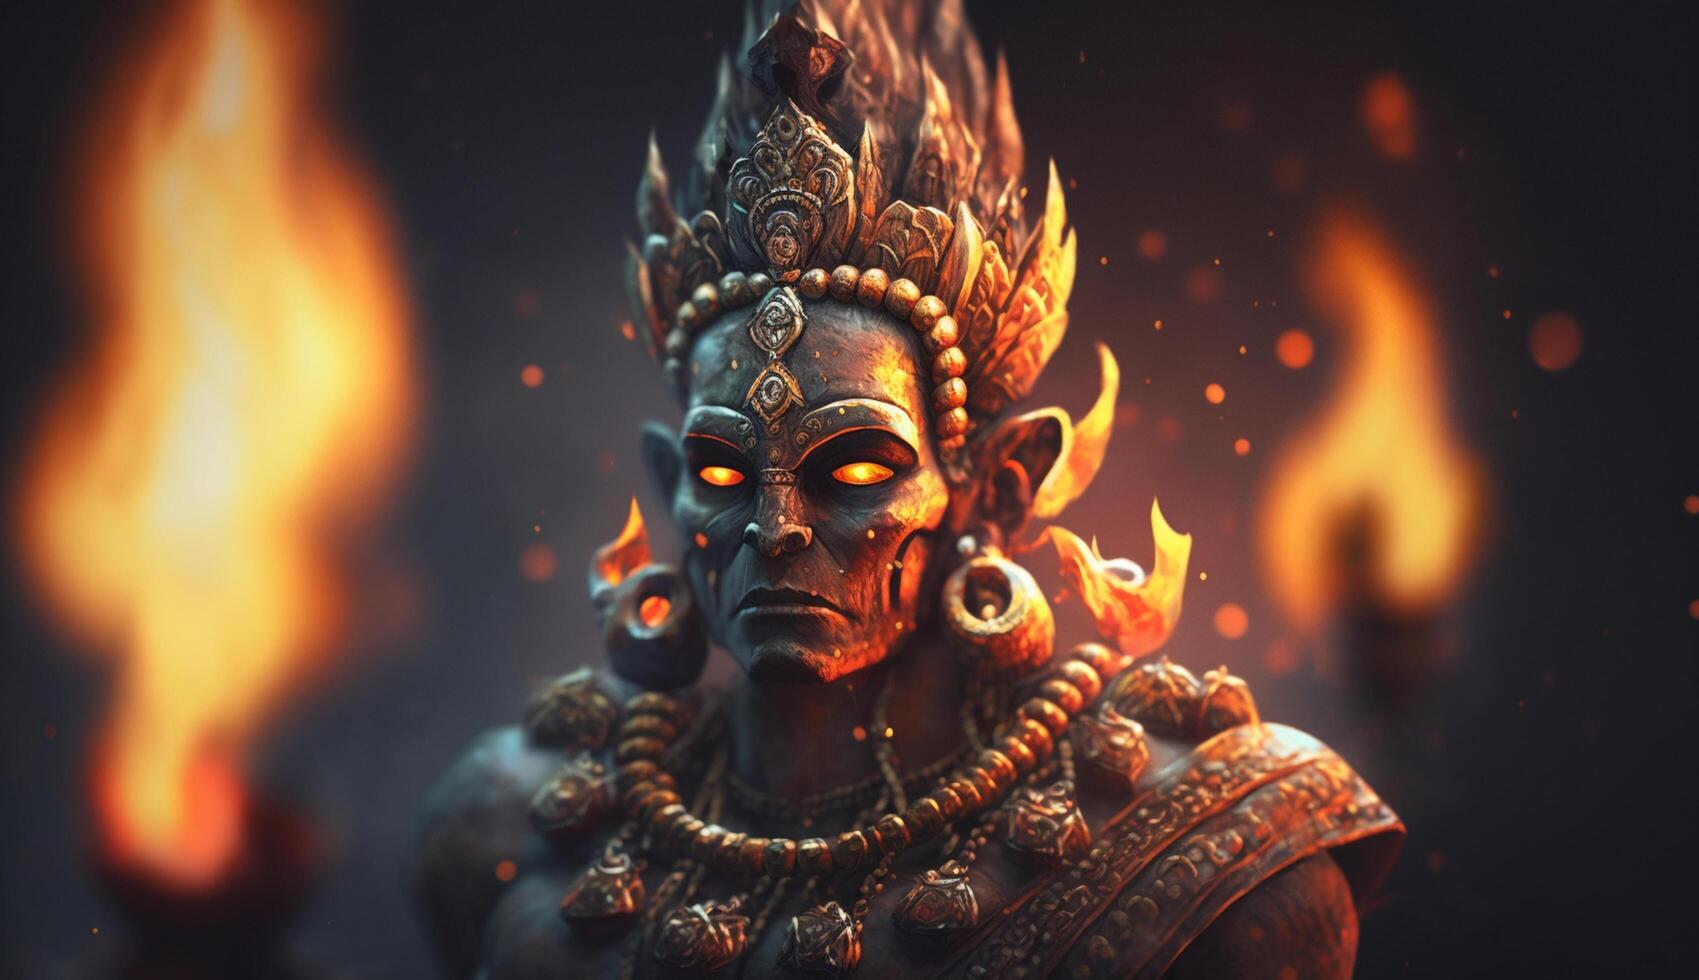 Portrait of Agni, the Indian God of Fire, Surrounded by the Flames of his Dominion photo